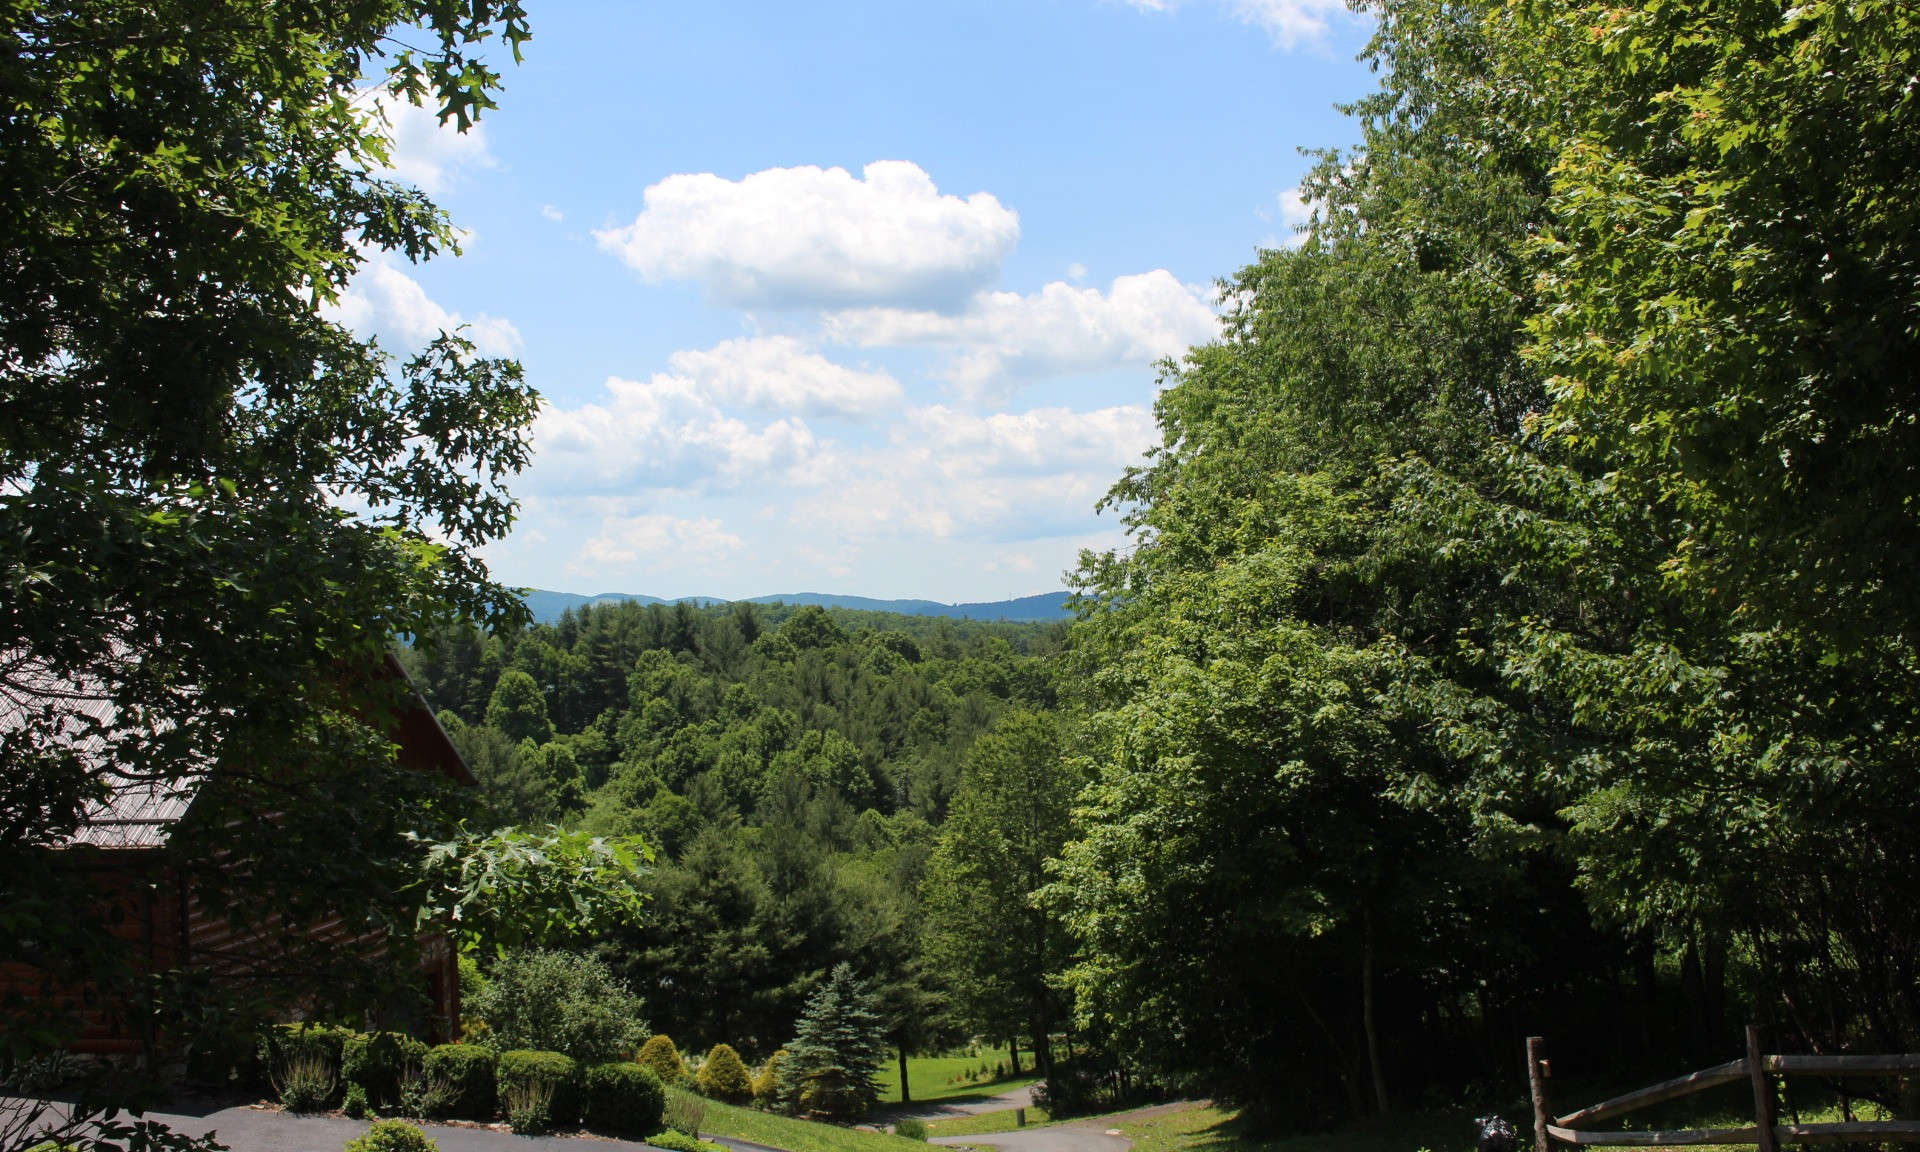 Lots 3,4, and 5 are now available in Laurel Ridge Estates, a well established community in the Fleetwood area of Southern Ashe County in the North Carolina Mountains.